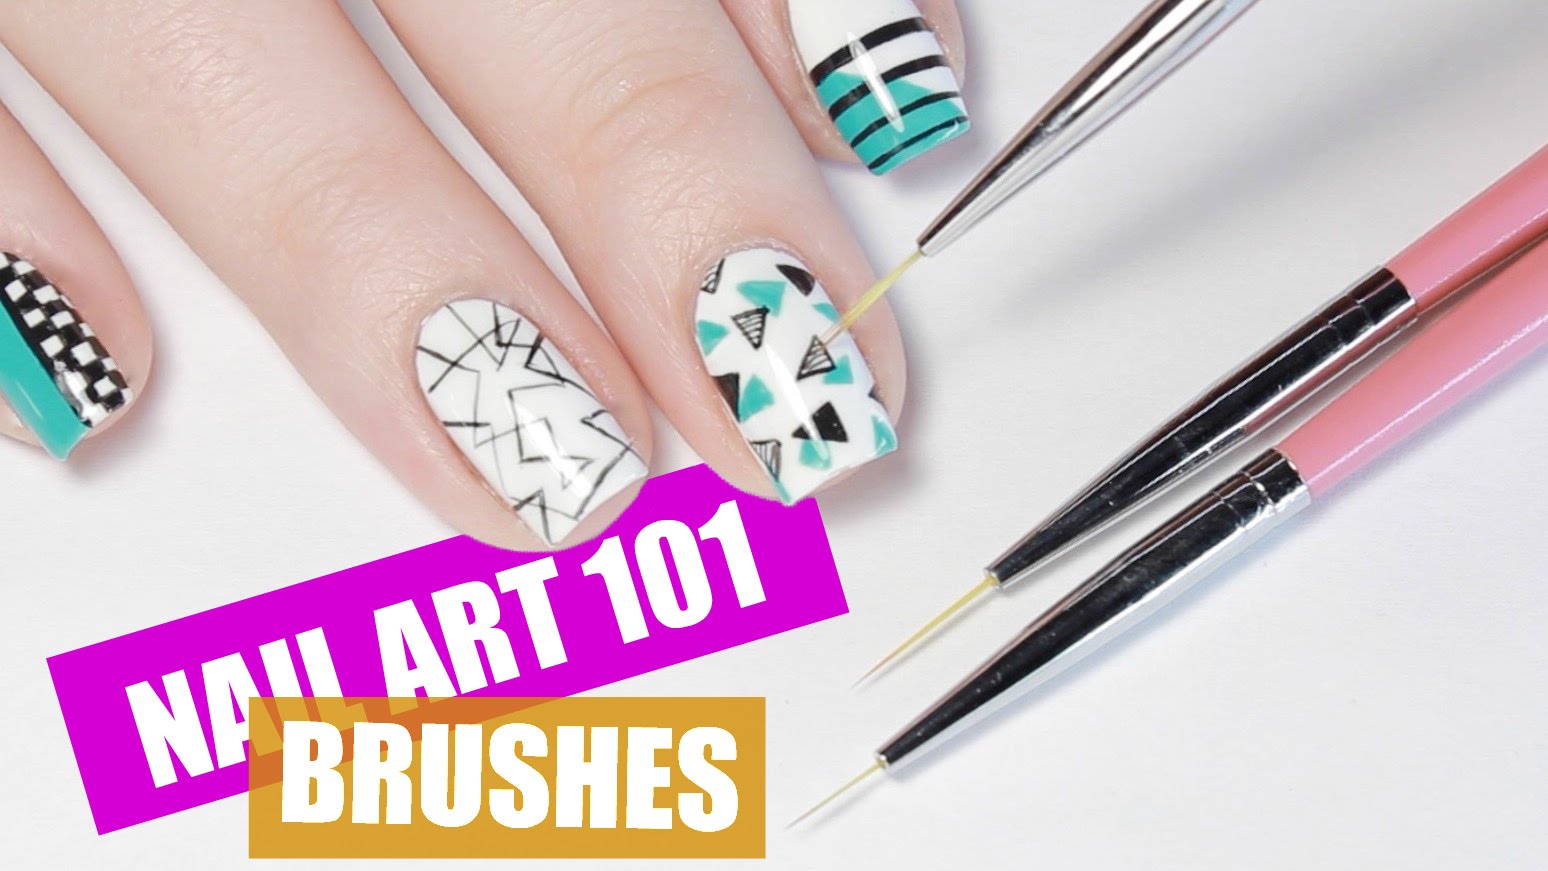 8. The Best Nail Art Brushes for Fine Details and Precision - wide 5